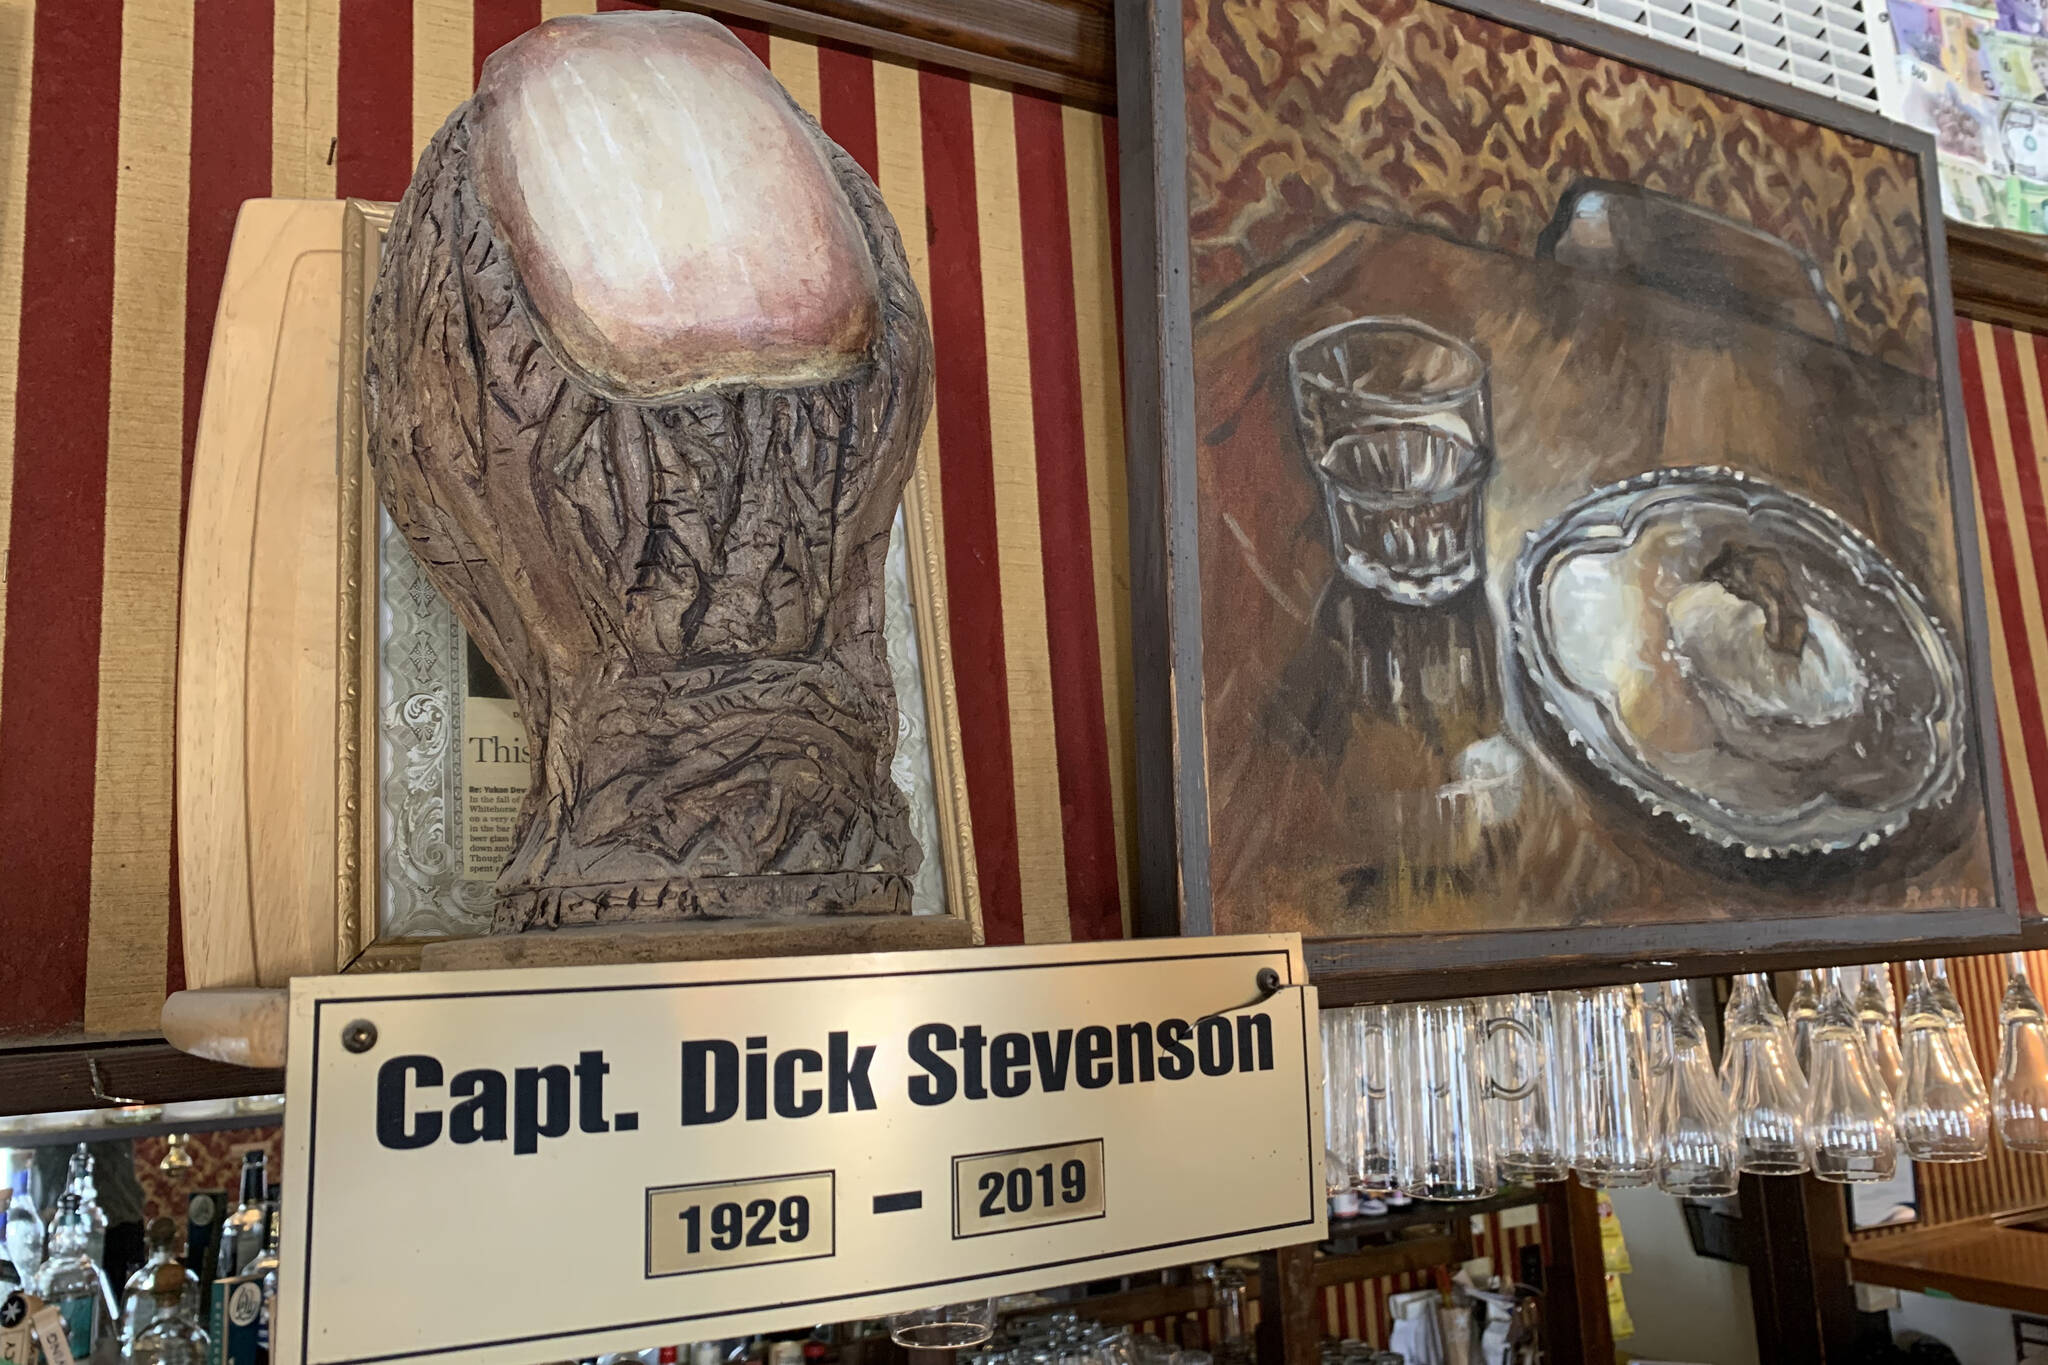 The Aug. 21 festivities will also feature an ash ceremony for Captain Dick Stevenson, who died in 2019. He rests in a toe-shaped urn. (Submitted/Downtown Hotel)